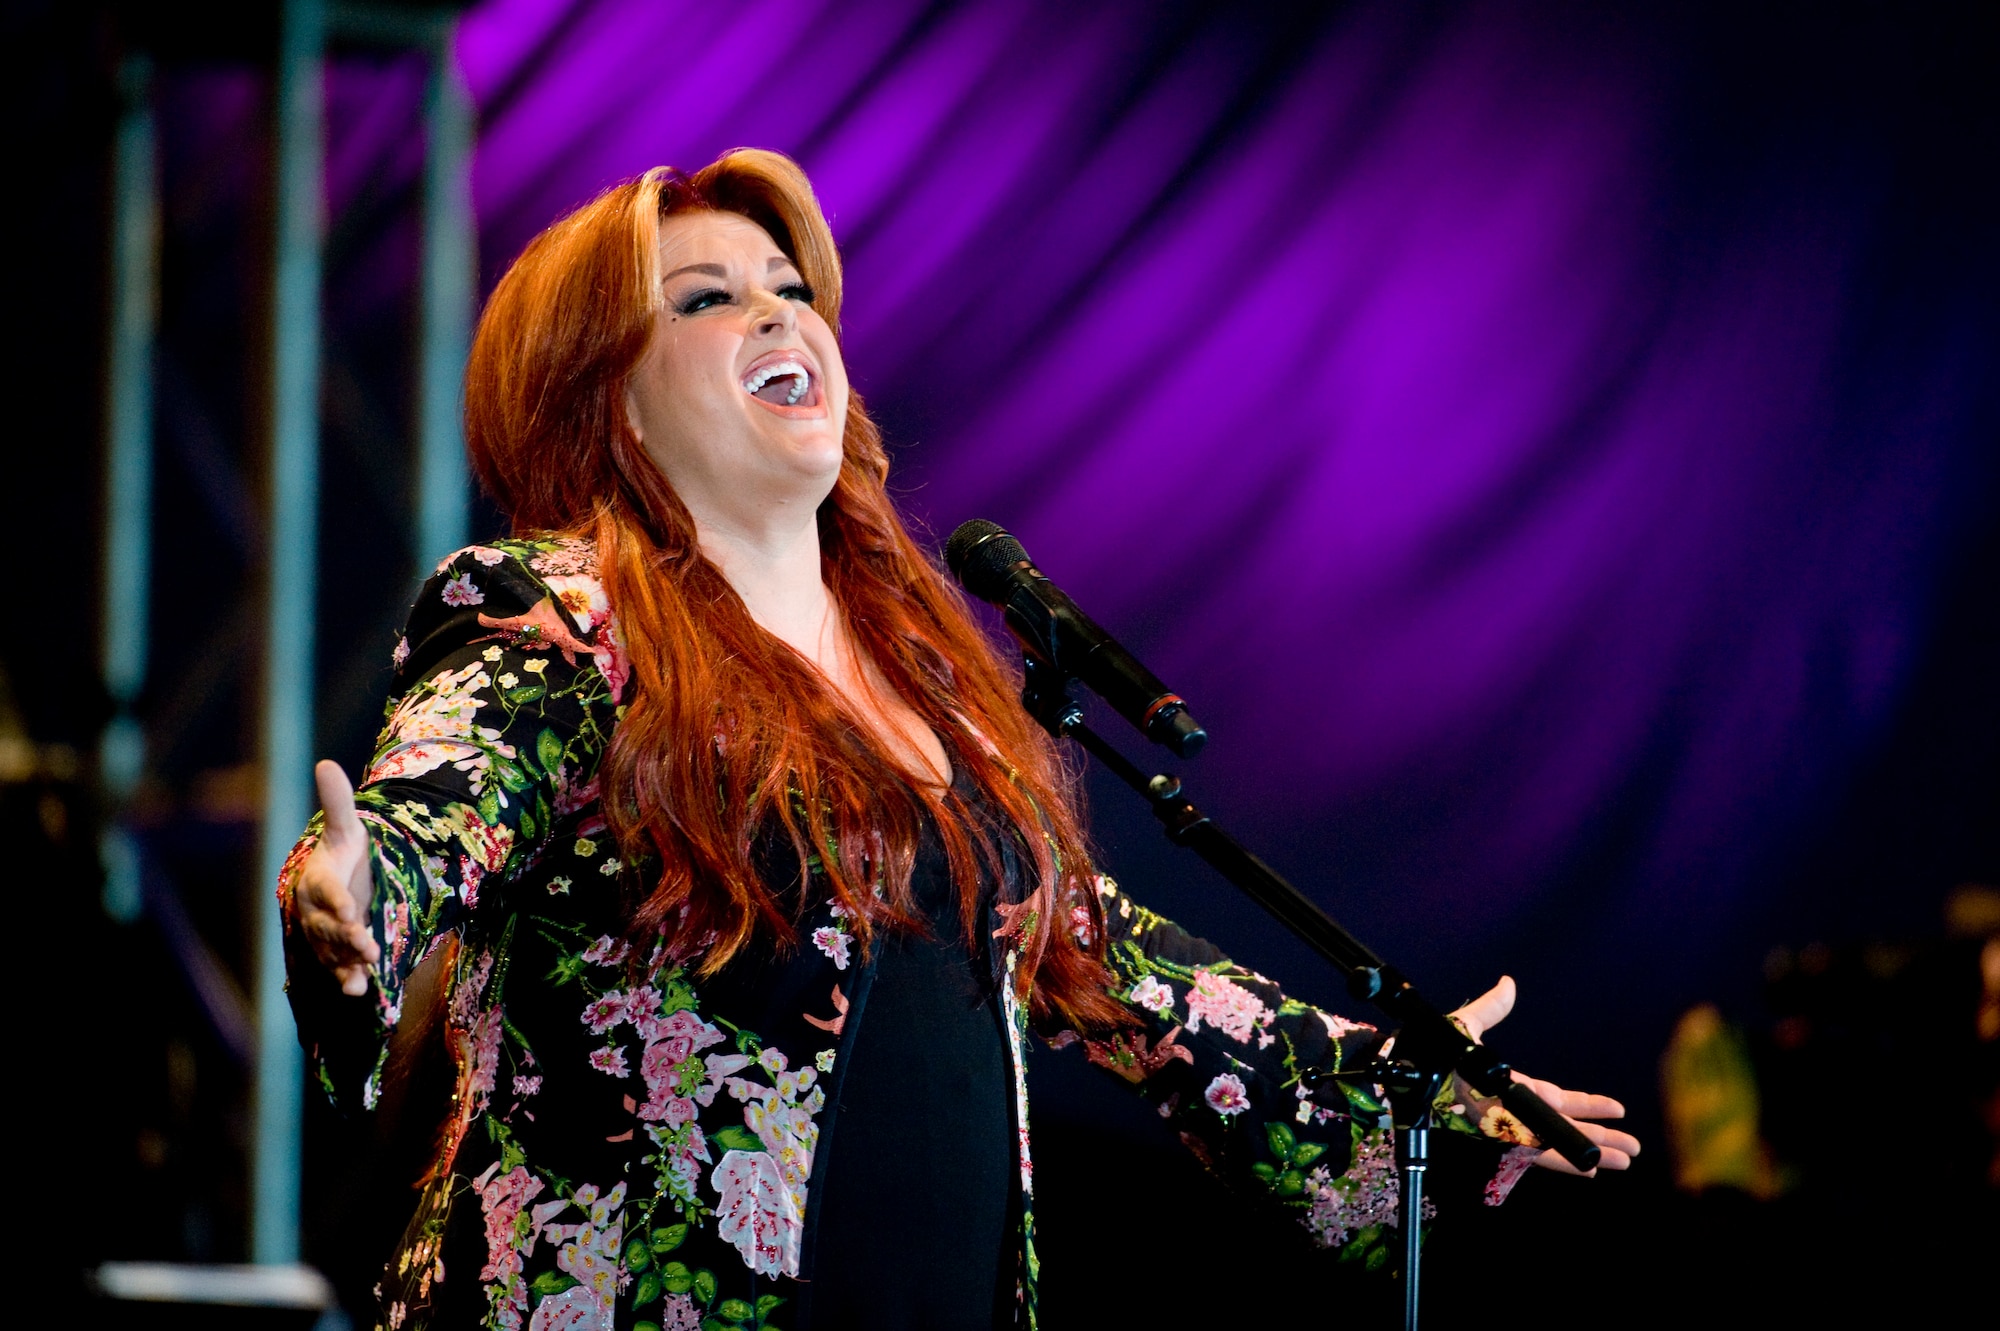 ELMENDORF AIR FORCE BASE, Alaska -- Wynonna Judd performs to the military and Alaska crowd at the "Alaska's Concert for the Military" June 27 at Hangar 2. The concert was a part of Alaska's 50 years statehood celebration. (U.S. Air Force photo by Senior Airman Jonathan Steffen)